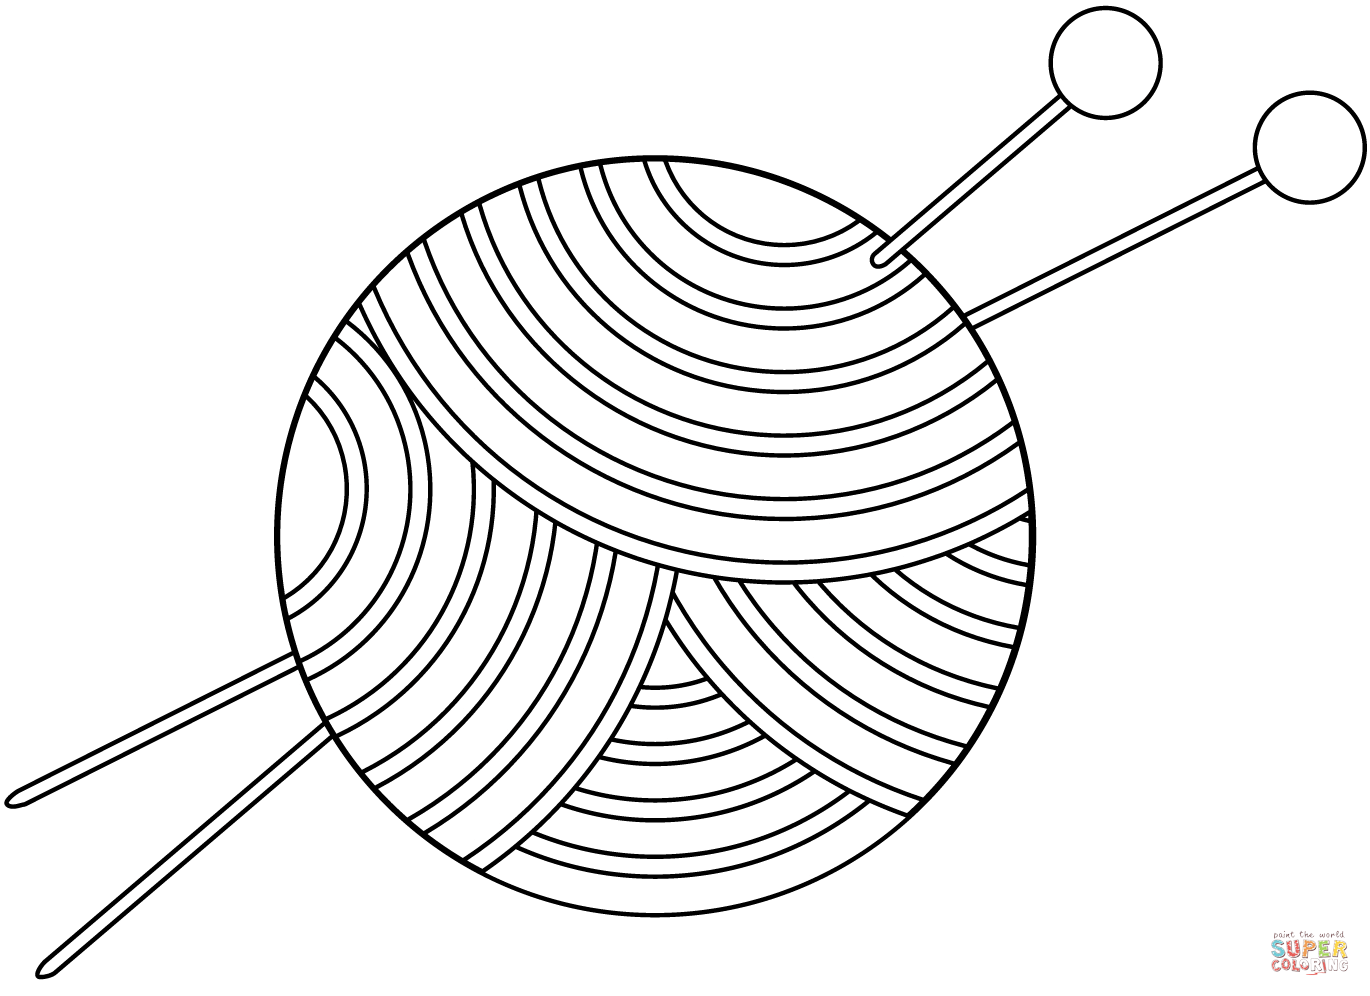 Yarn coloring page | Free Printable Coloring Pages - Clip Art Library